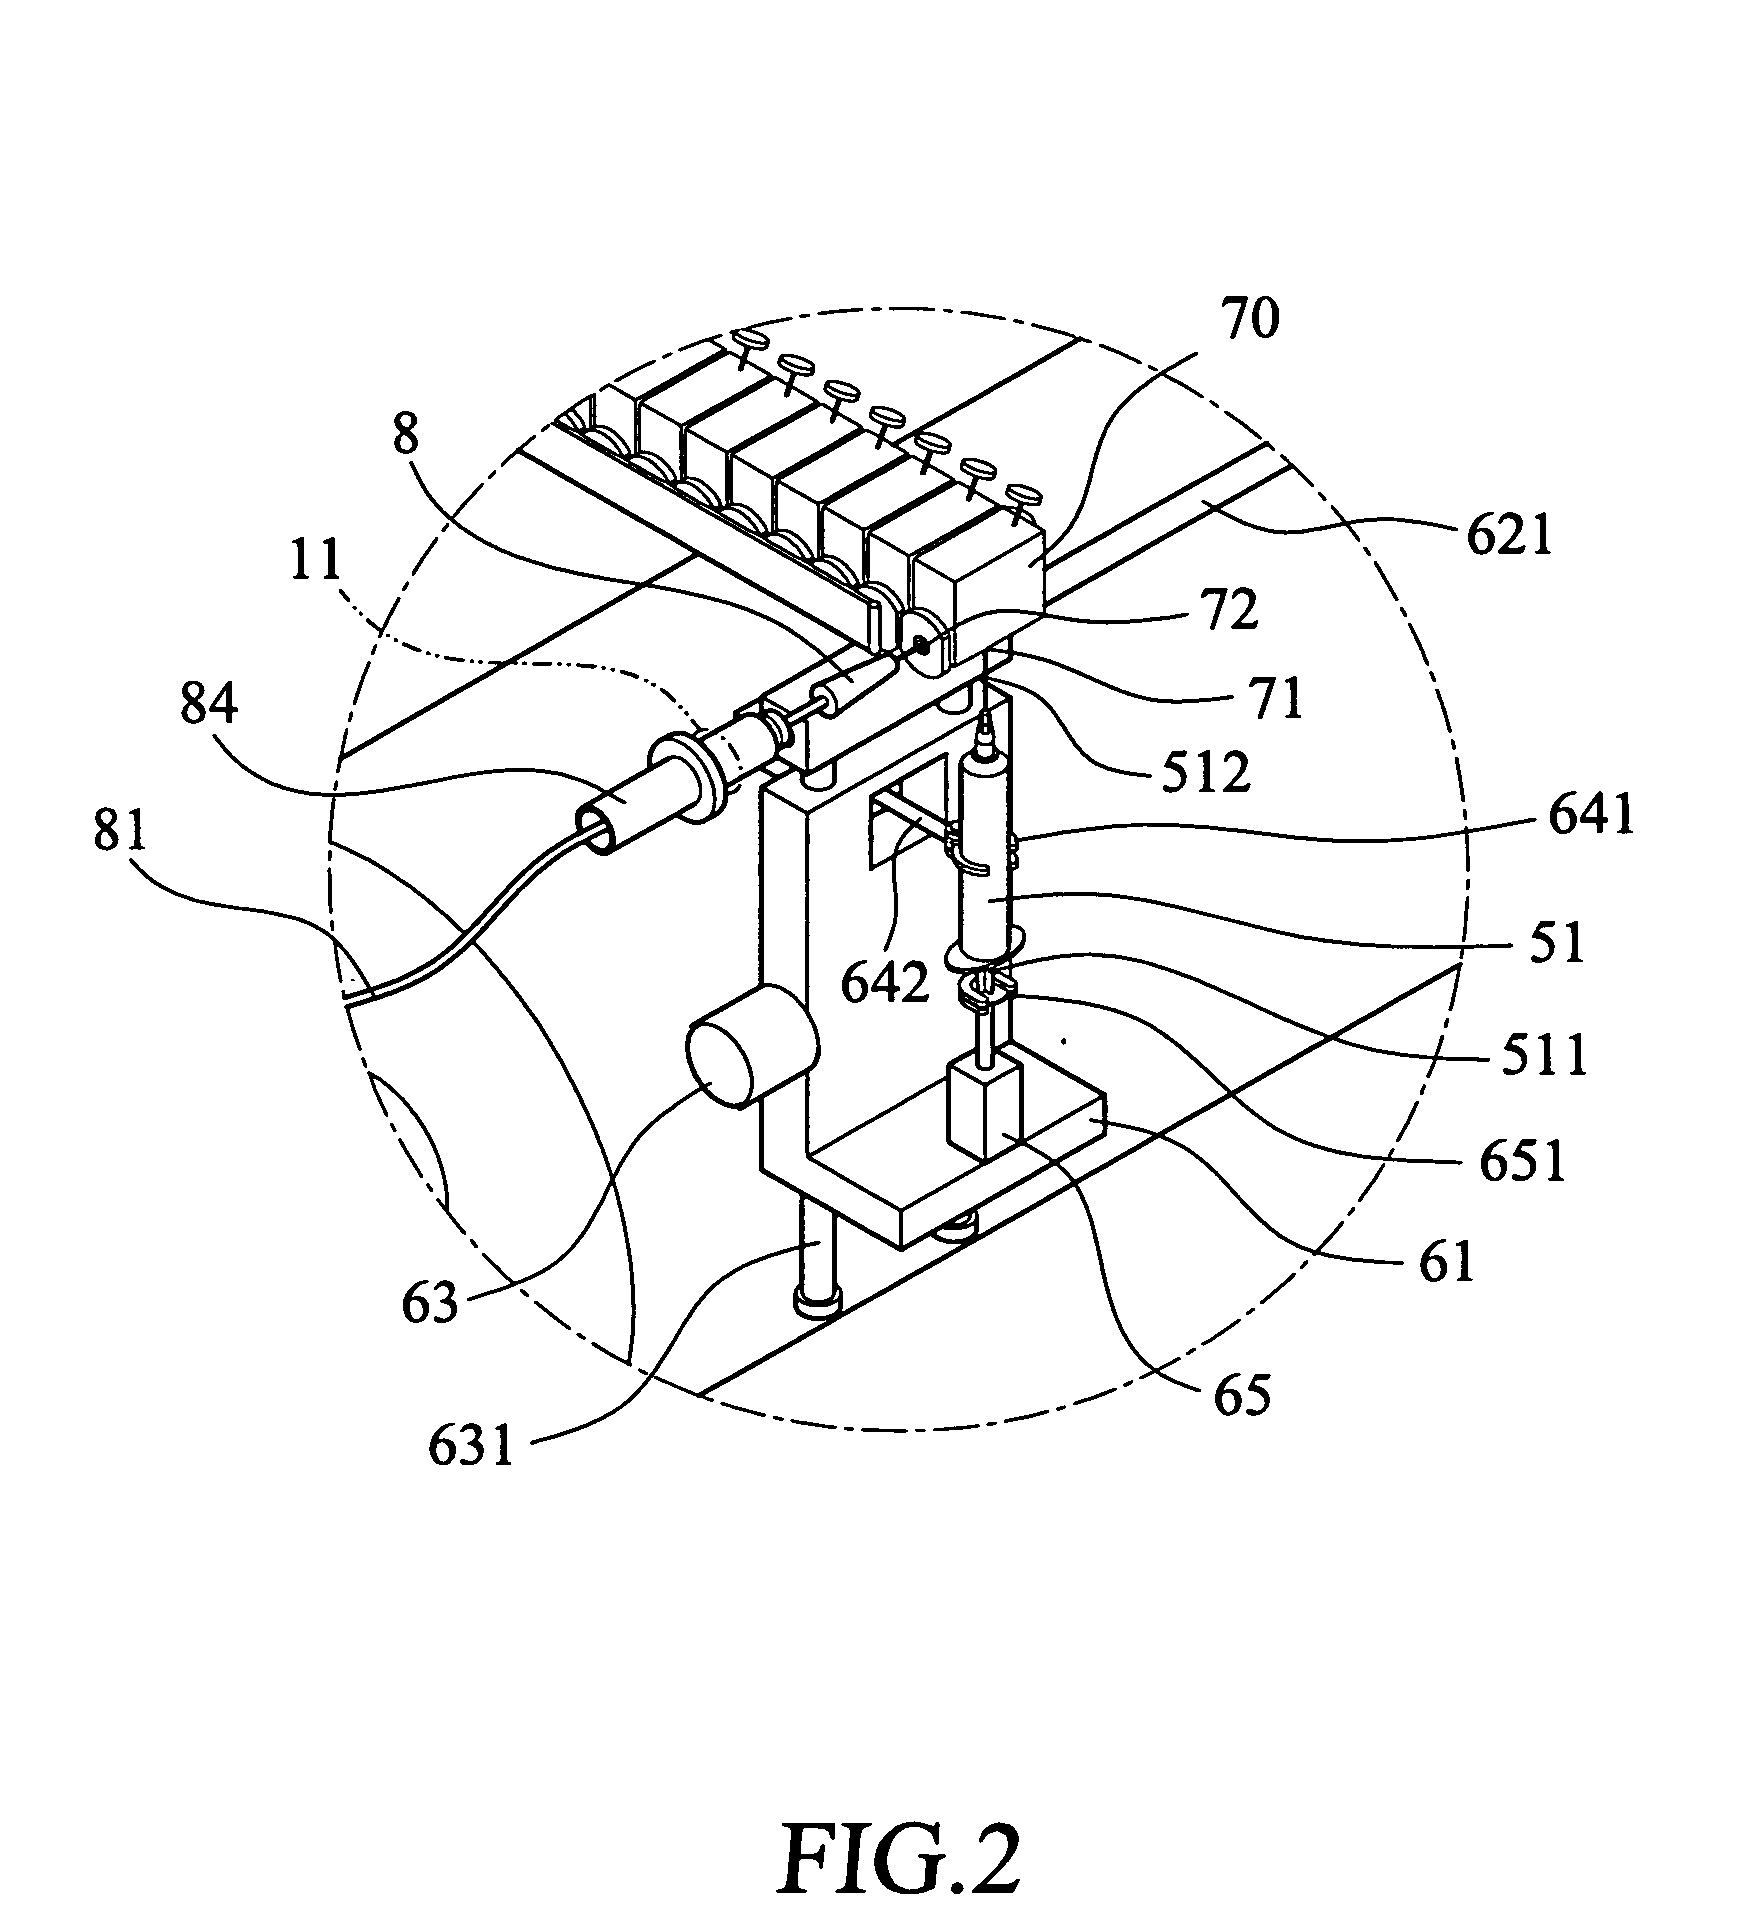 Disposable saline water cartridge module for radiopharmaceuticals dispensing and injection system